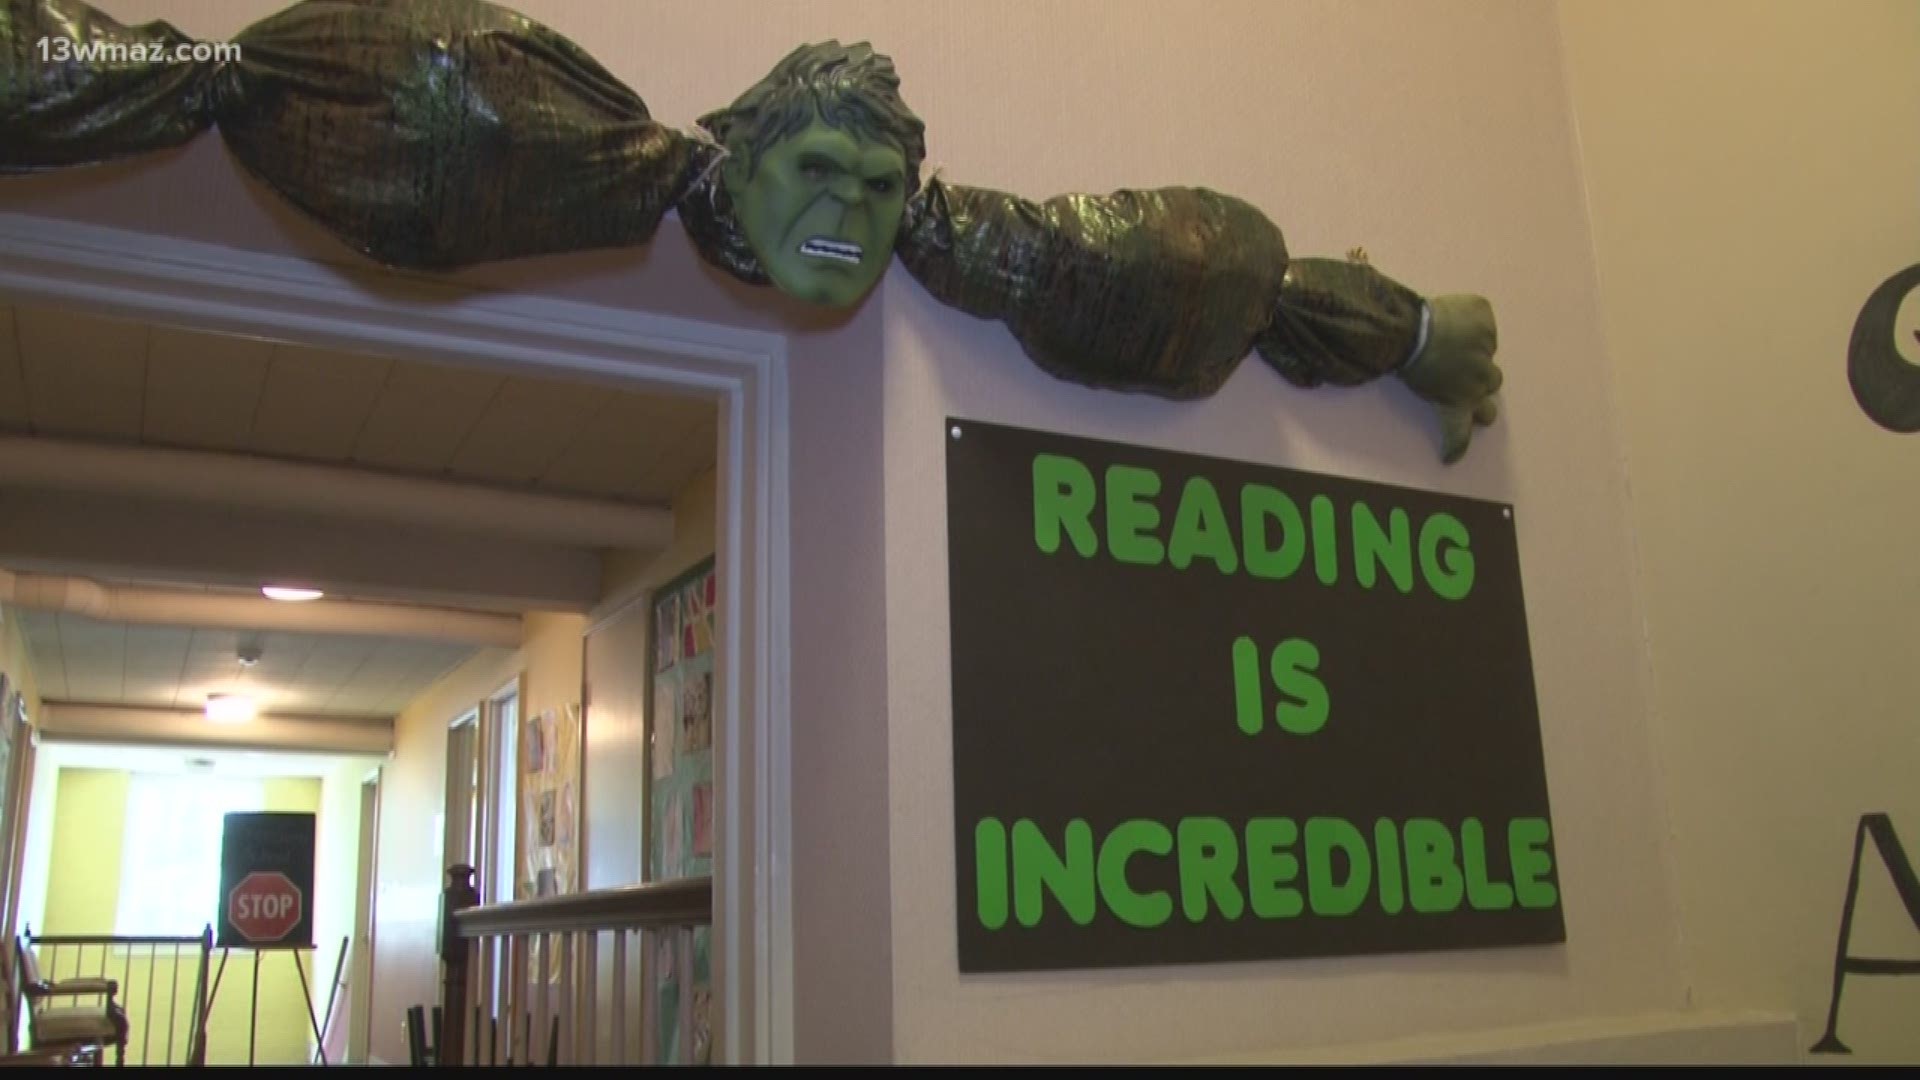 Bibb County Schools are working to improve third grade reading levels through a partnership with Mercer University. Pepper Baker tells us about a free summer program aimed at getting students excited about reading.